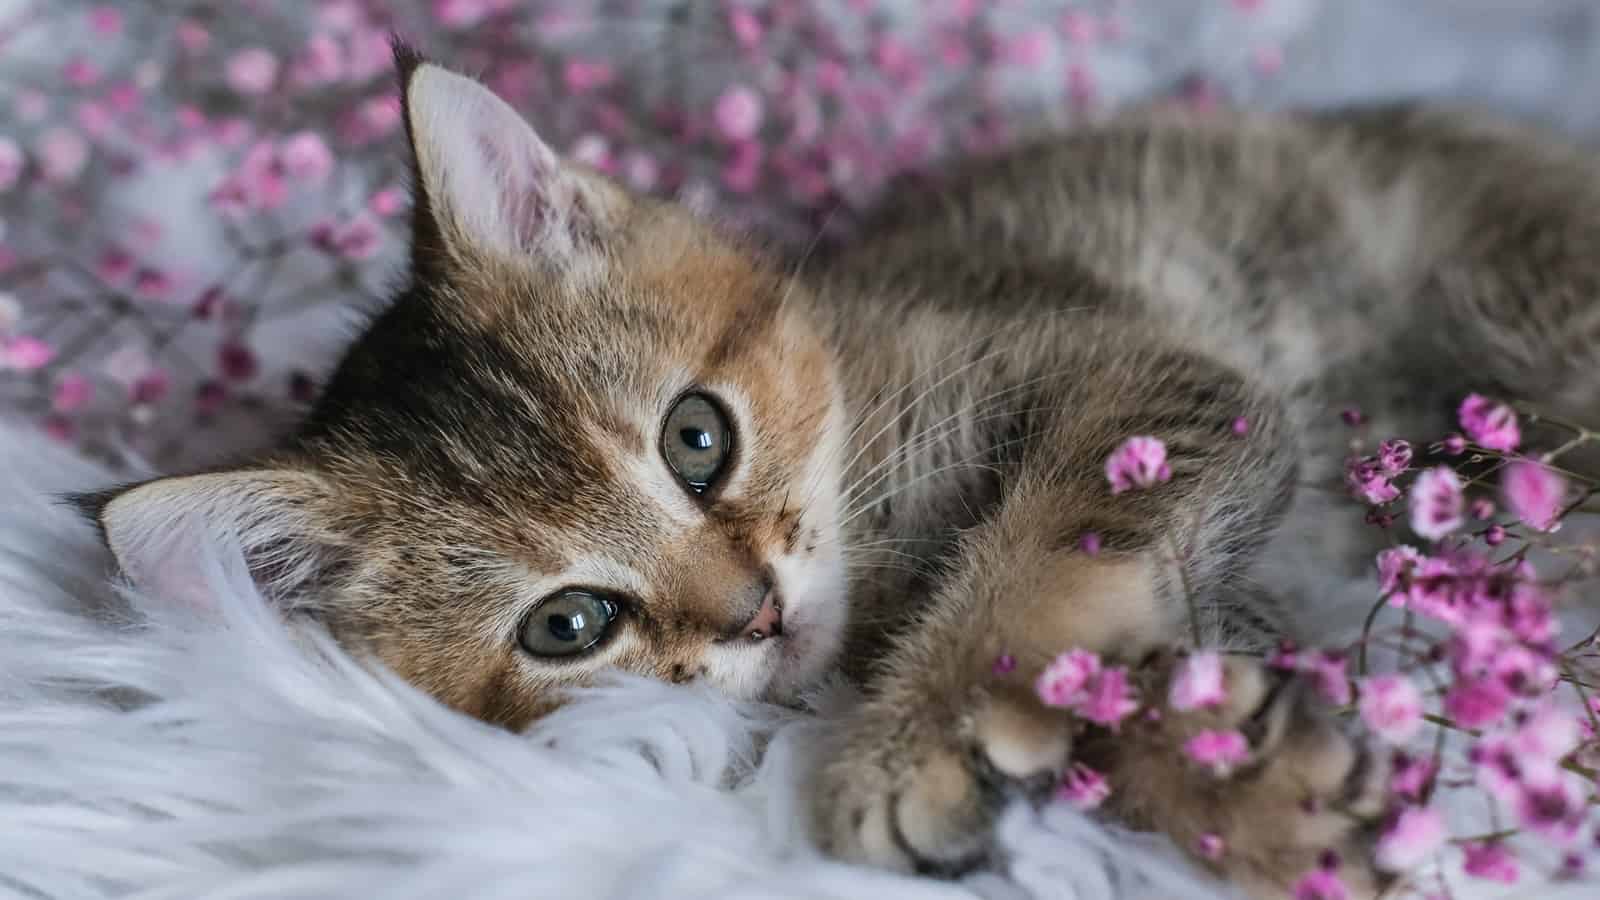 Cute Scottish Straight kitten and pink flowers on a white blanket